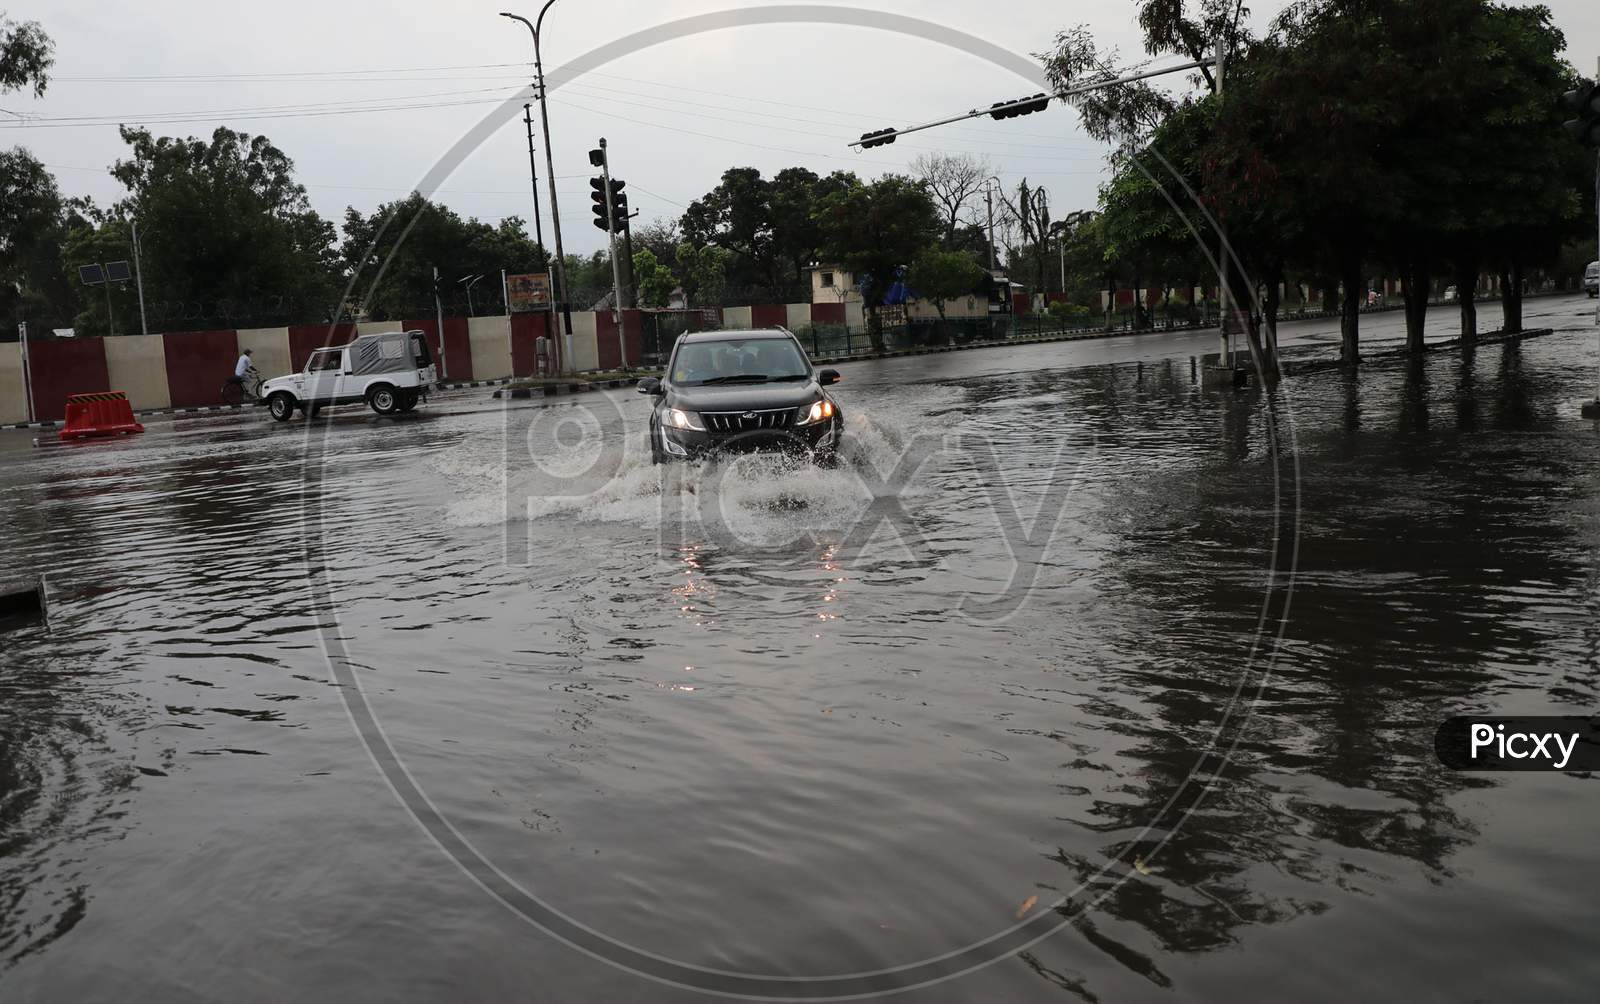 People drive through a water-logged street during rains on the outskirts of Jammu on July 29, 2020.